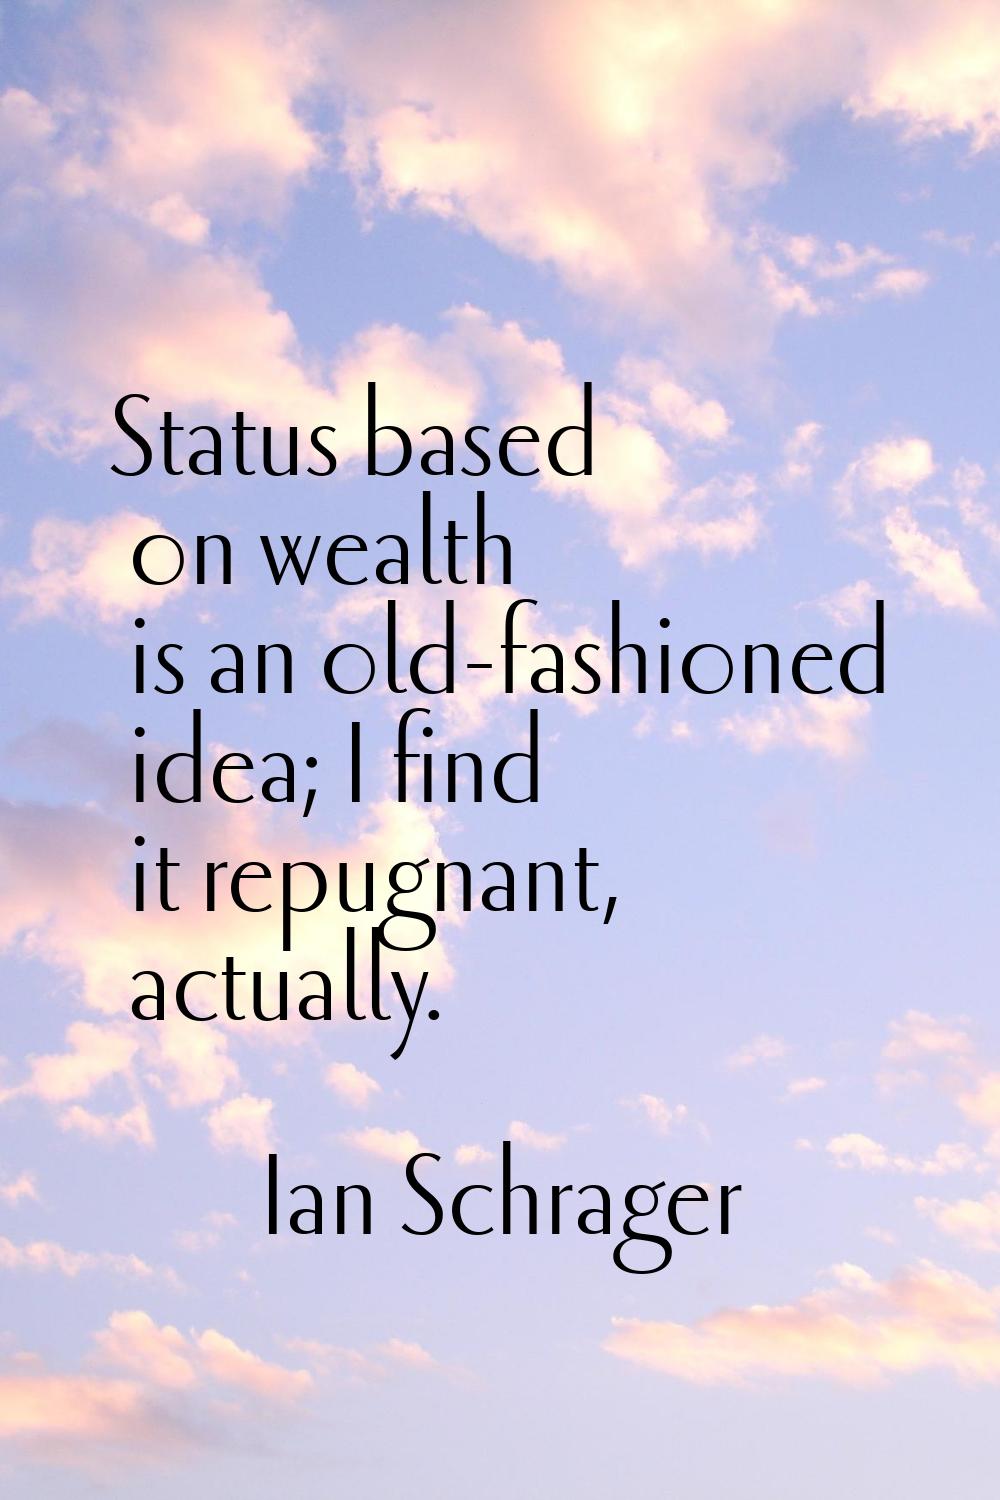 Status based on wealth is an old-fashioned idea; I find it repugnant, actually.